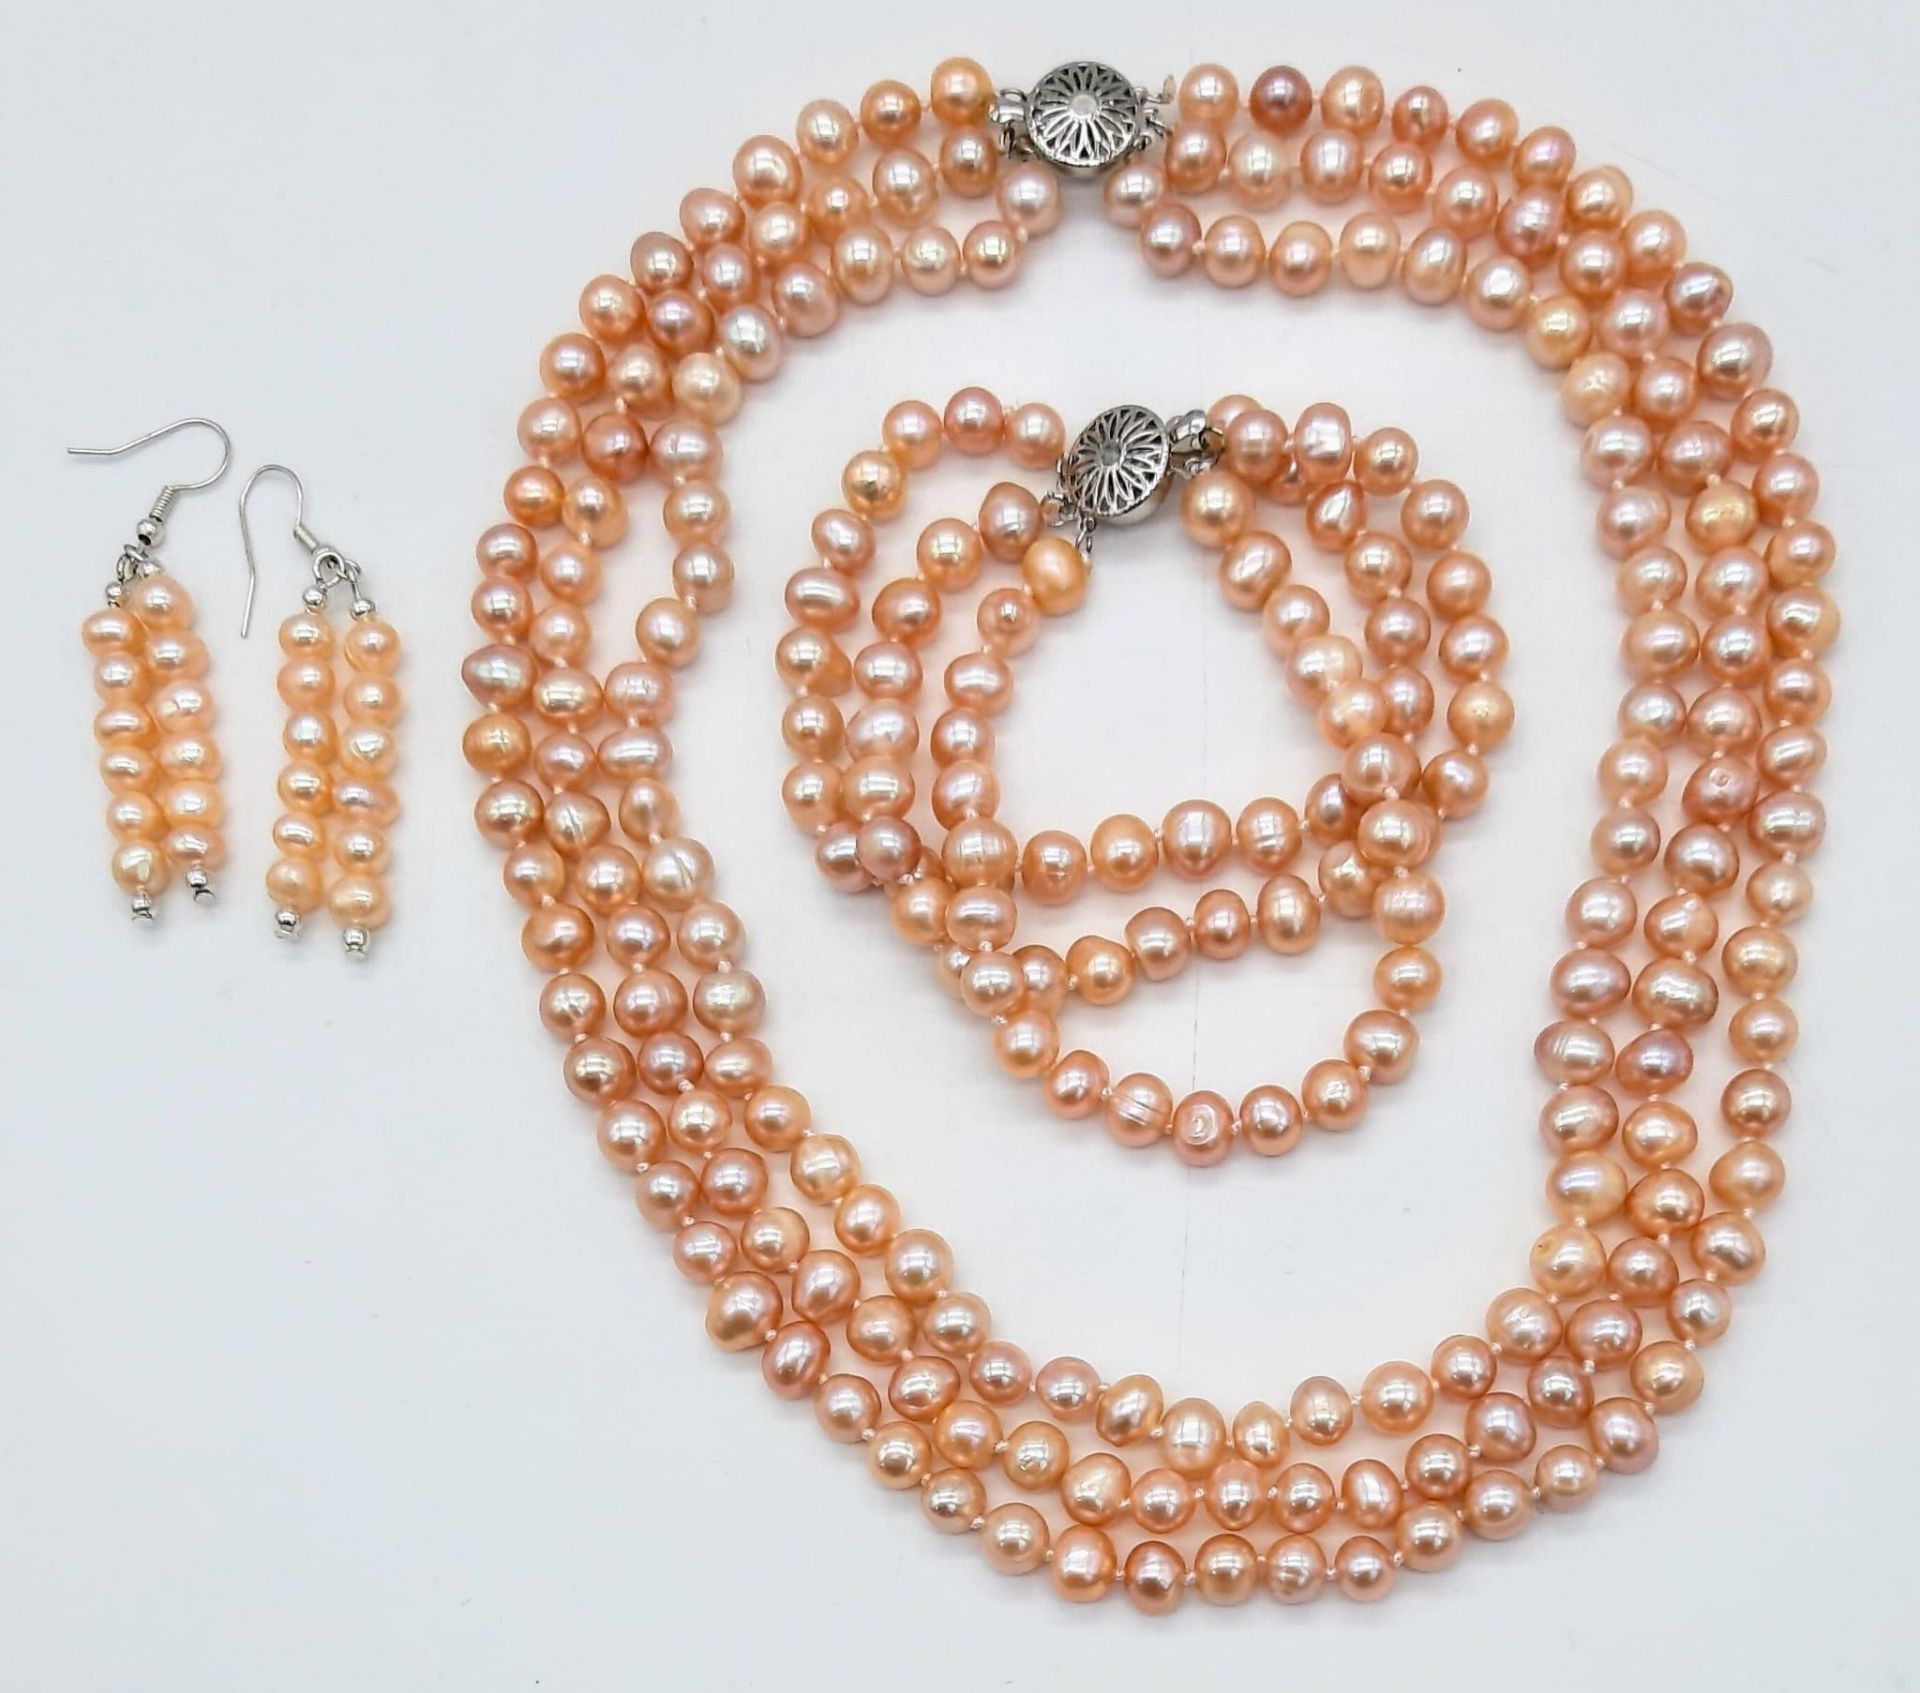 A fashionable three strand of high quality, natural pink pearls necklace, bracelet and earrings